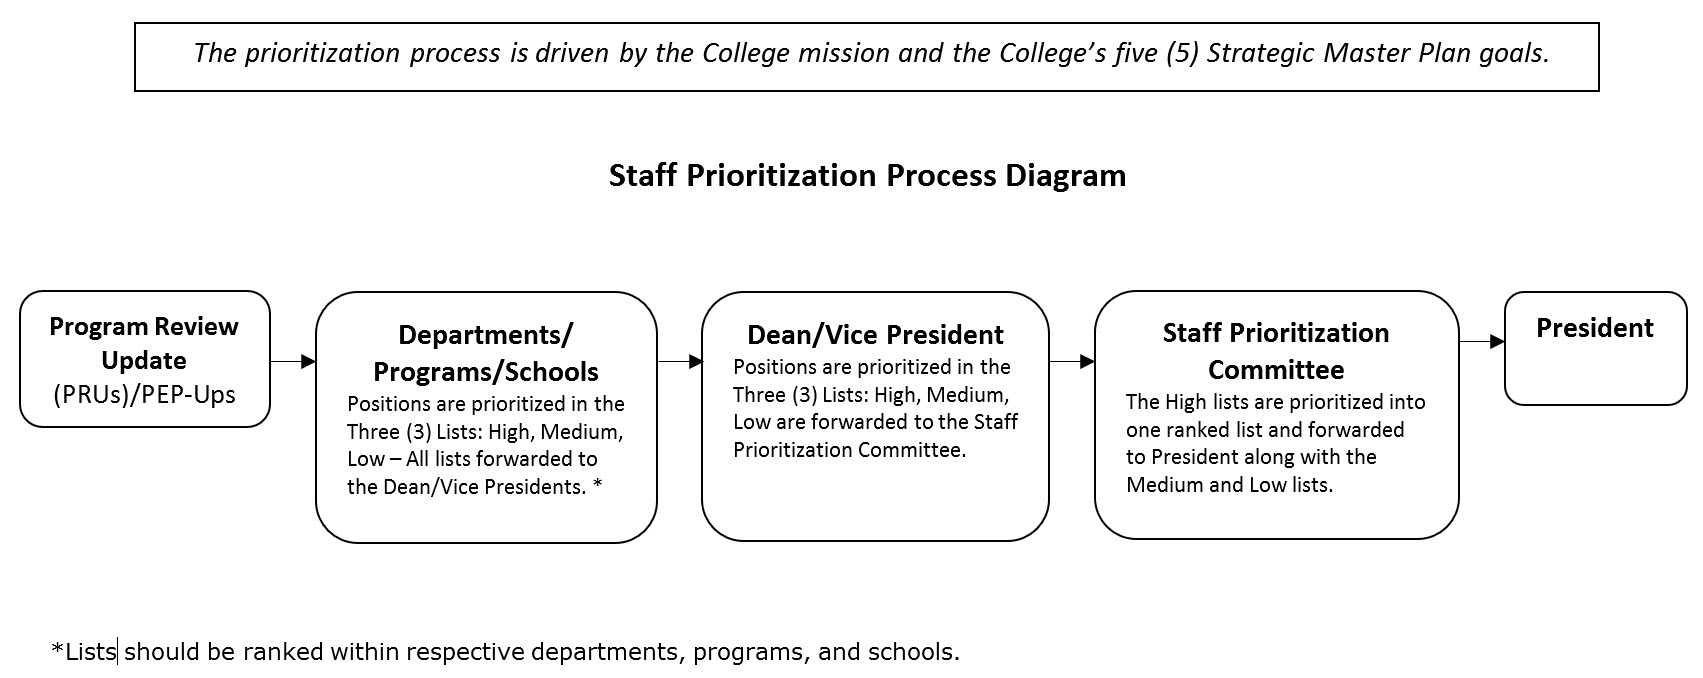 Staff Prioritization Process, full description provided in the following text